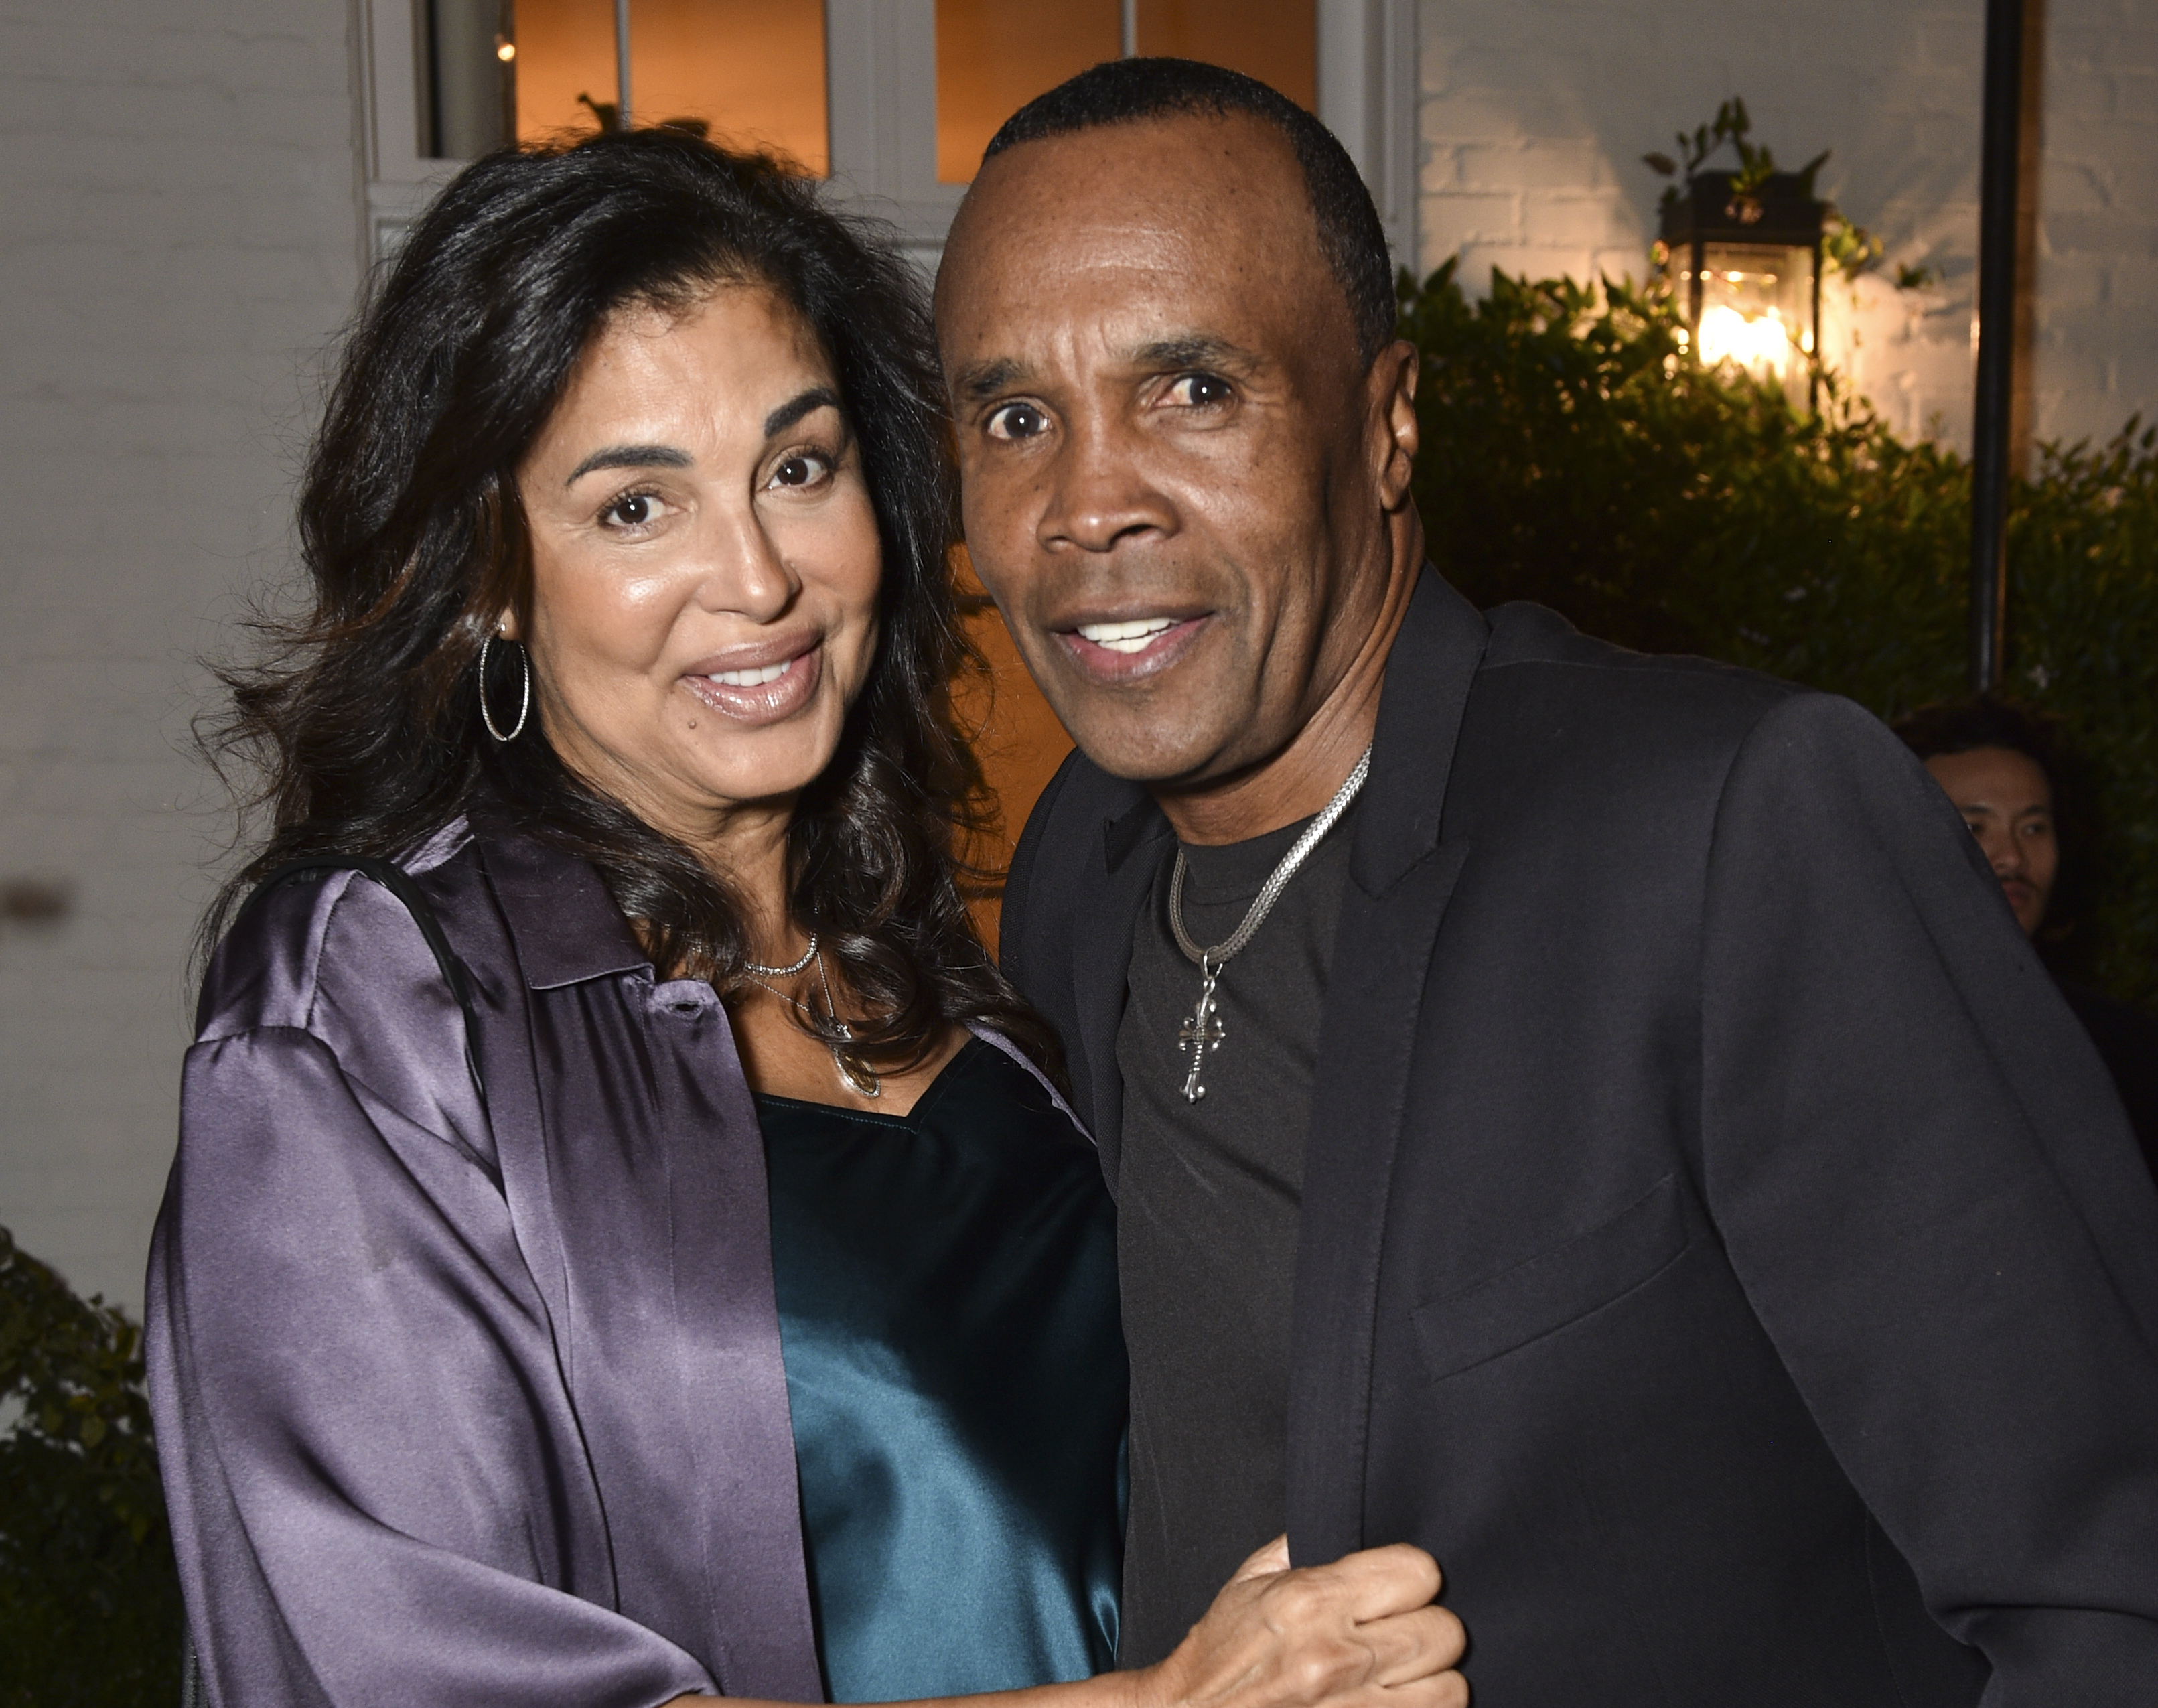 Bernadette Robi and Sugar Ray Leonard attend th event A Sense of Home Gala on Novemebr 1, 2019, in  Los Angeles, Califronia. | Source: Getty Images